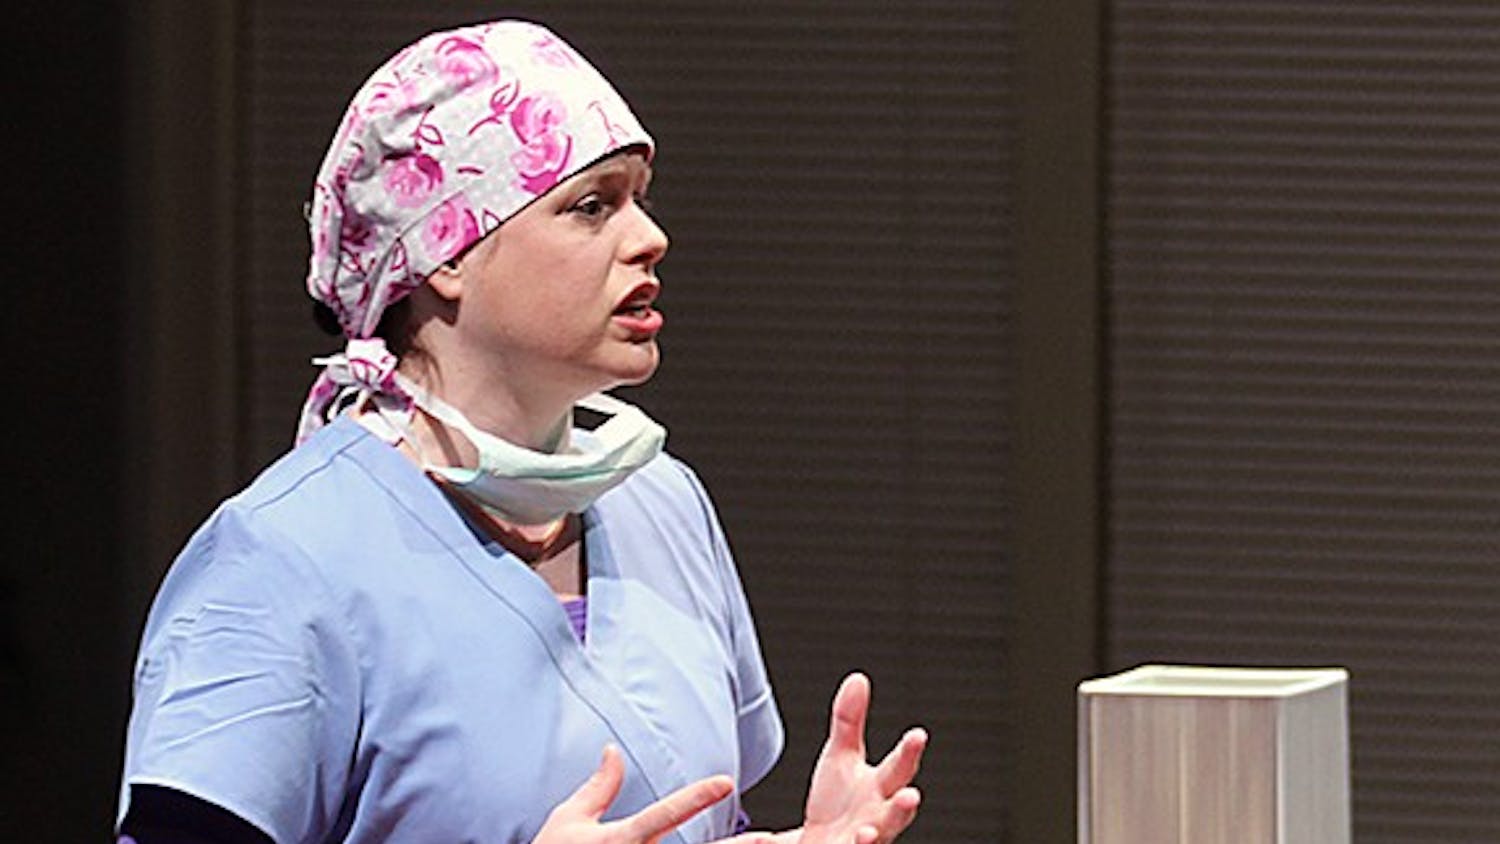 Jenny Wales (left) and Julia Gibson perform in "Love Alone," presented by the Playmakers Repertory Company starting Feb. 26 and continuing through March 16. Playmakers' production of Deborah Salem Smith's story of grief and healing will be performed in the Paul Green Theatre at UNC's Center for Dramatic Art. Individual ticket prices start at $15. 